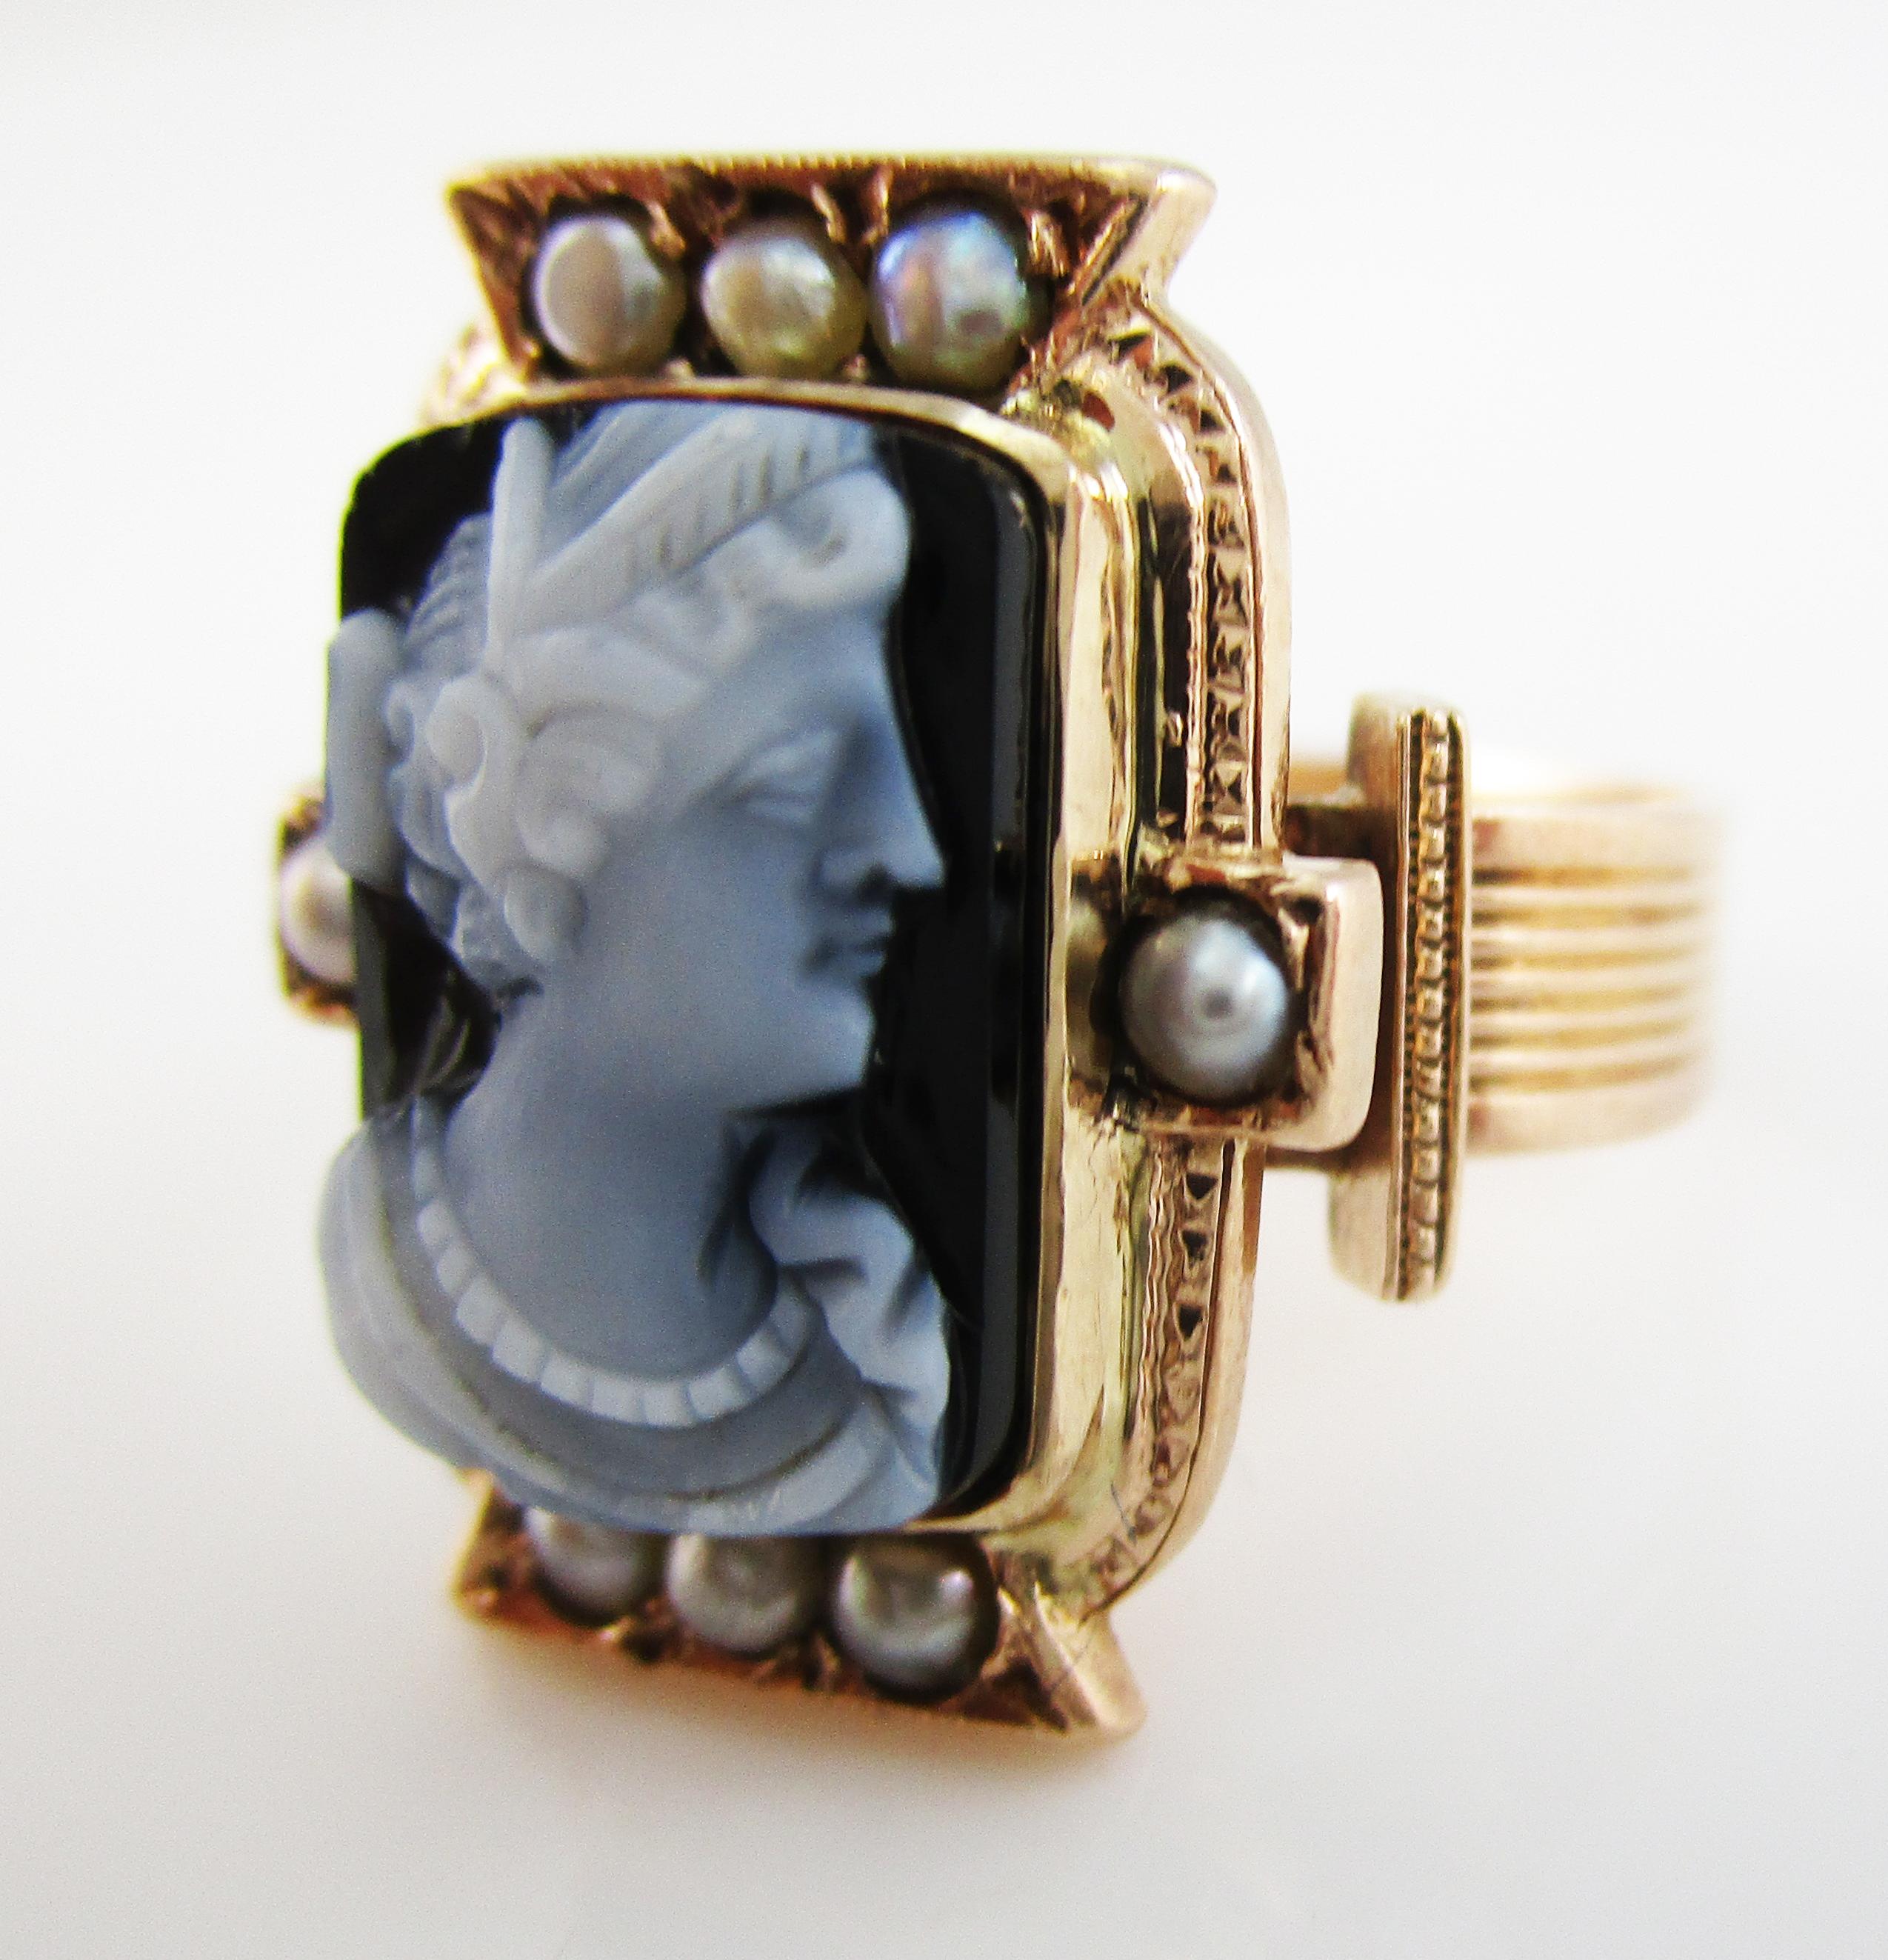 This magnificent Etruscan ring is in 14k rose gold and features a beautifully carved agate cameo center with a white face and black background! The rose gold serves as the perfect frame for the lovely, fine details of the carving of a distinguished